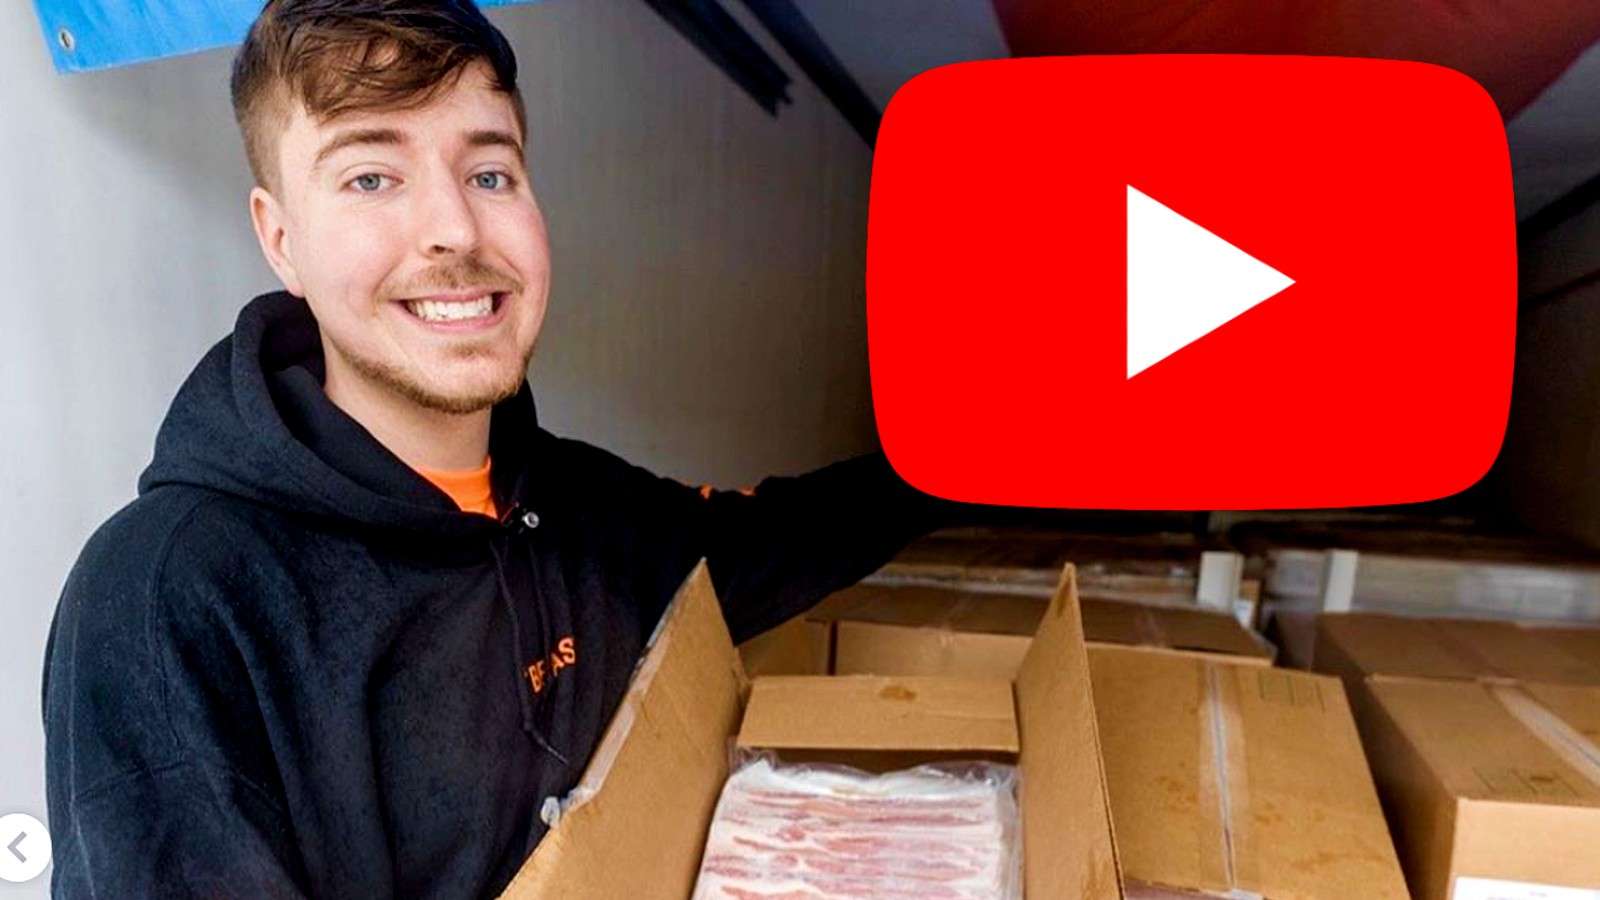 Mr Beast stands next to the YouTube logo